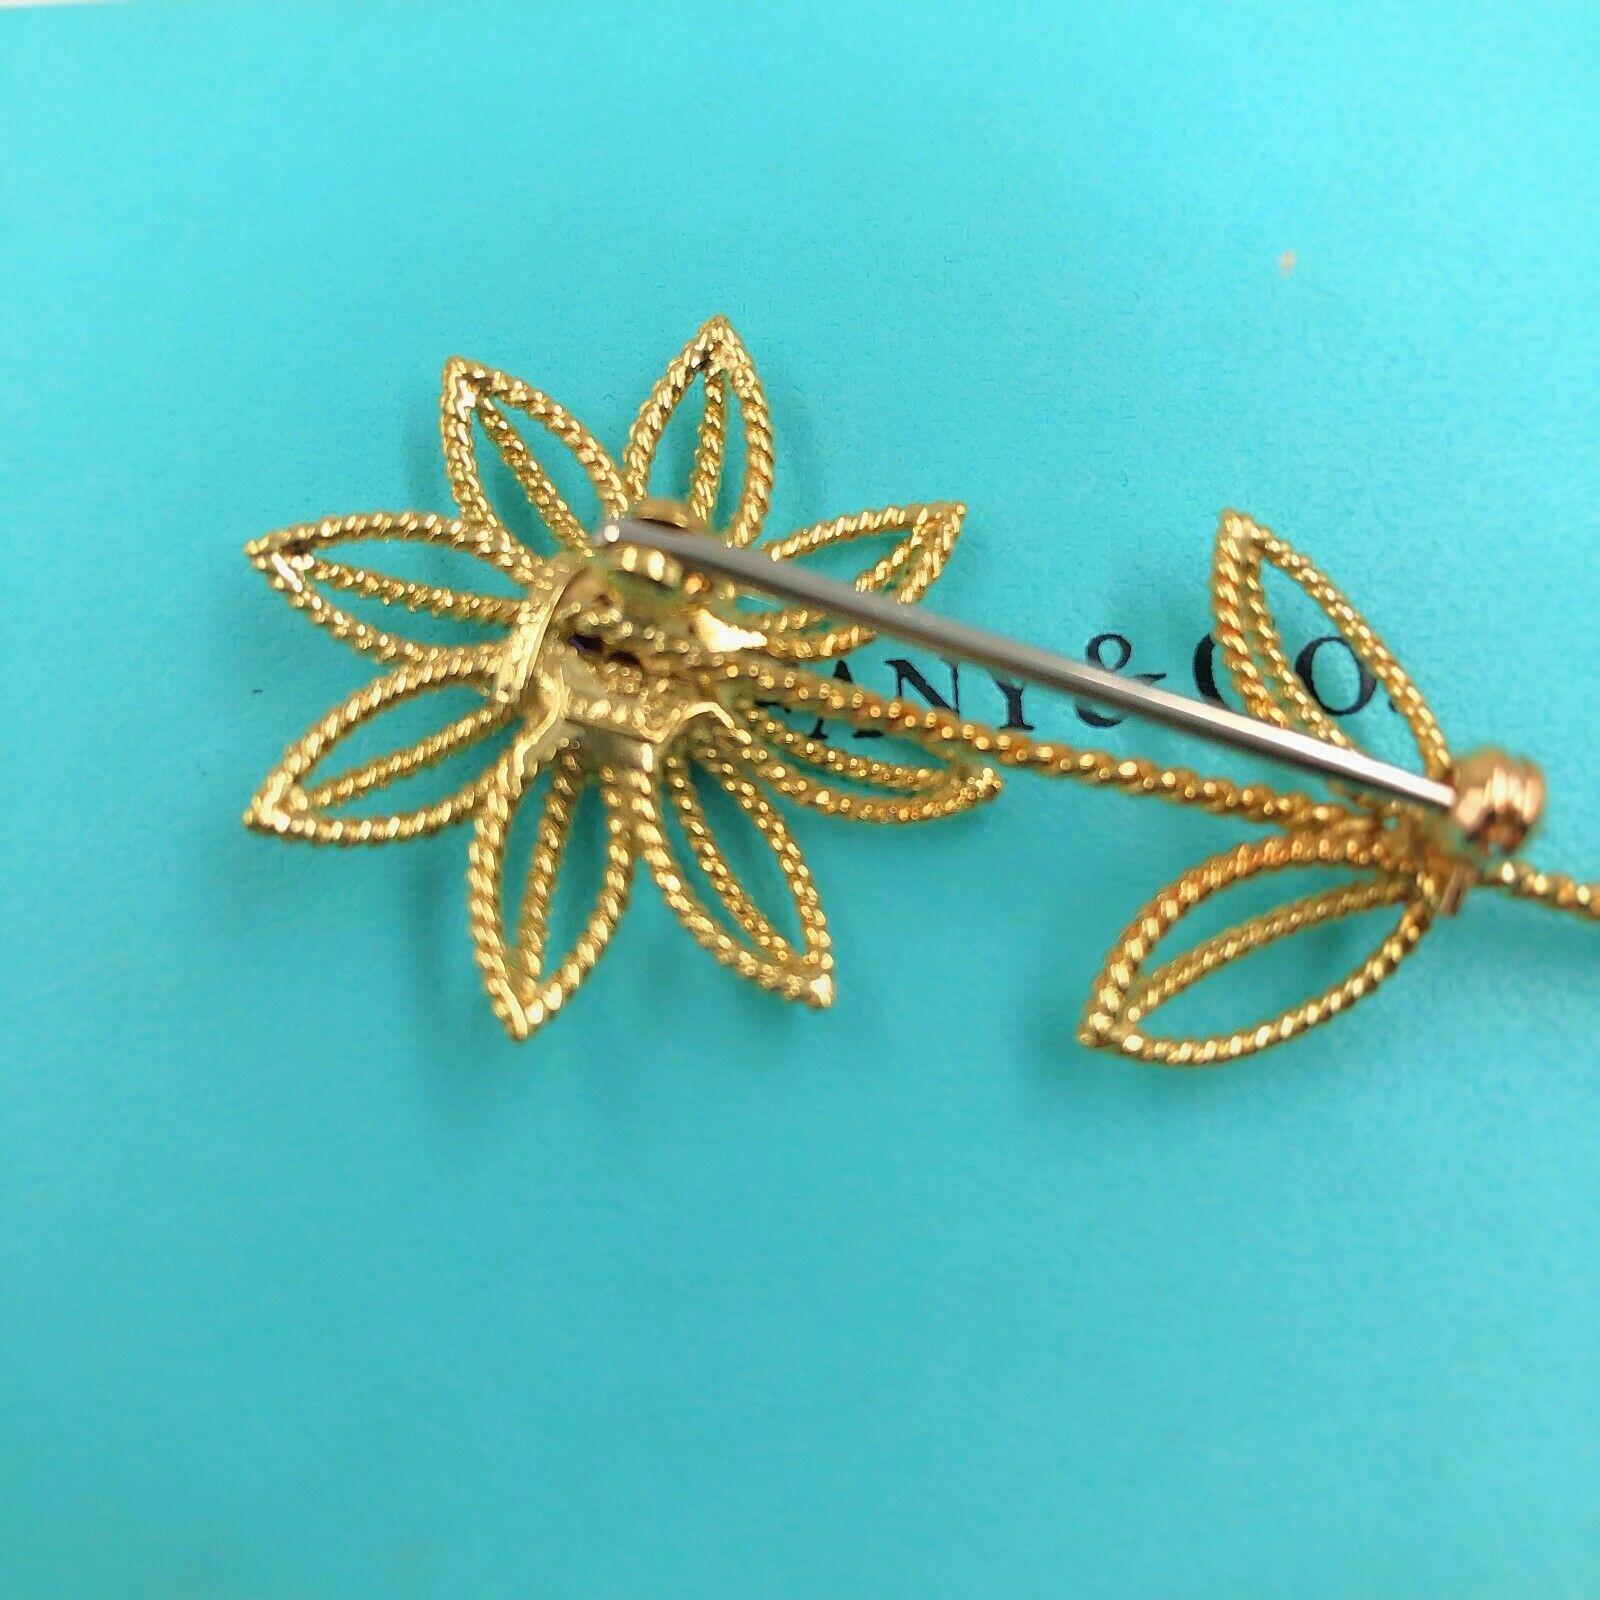 Authentic Vintage 1960s Tiffany & Co 18 Karat Gold Flower Brooch with Rubies 1